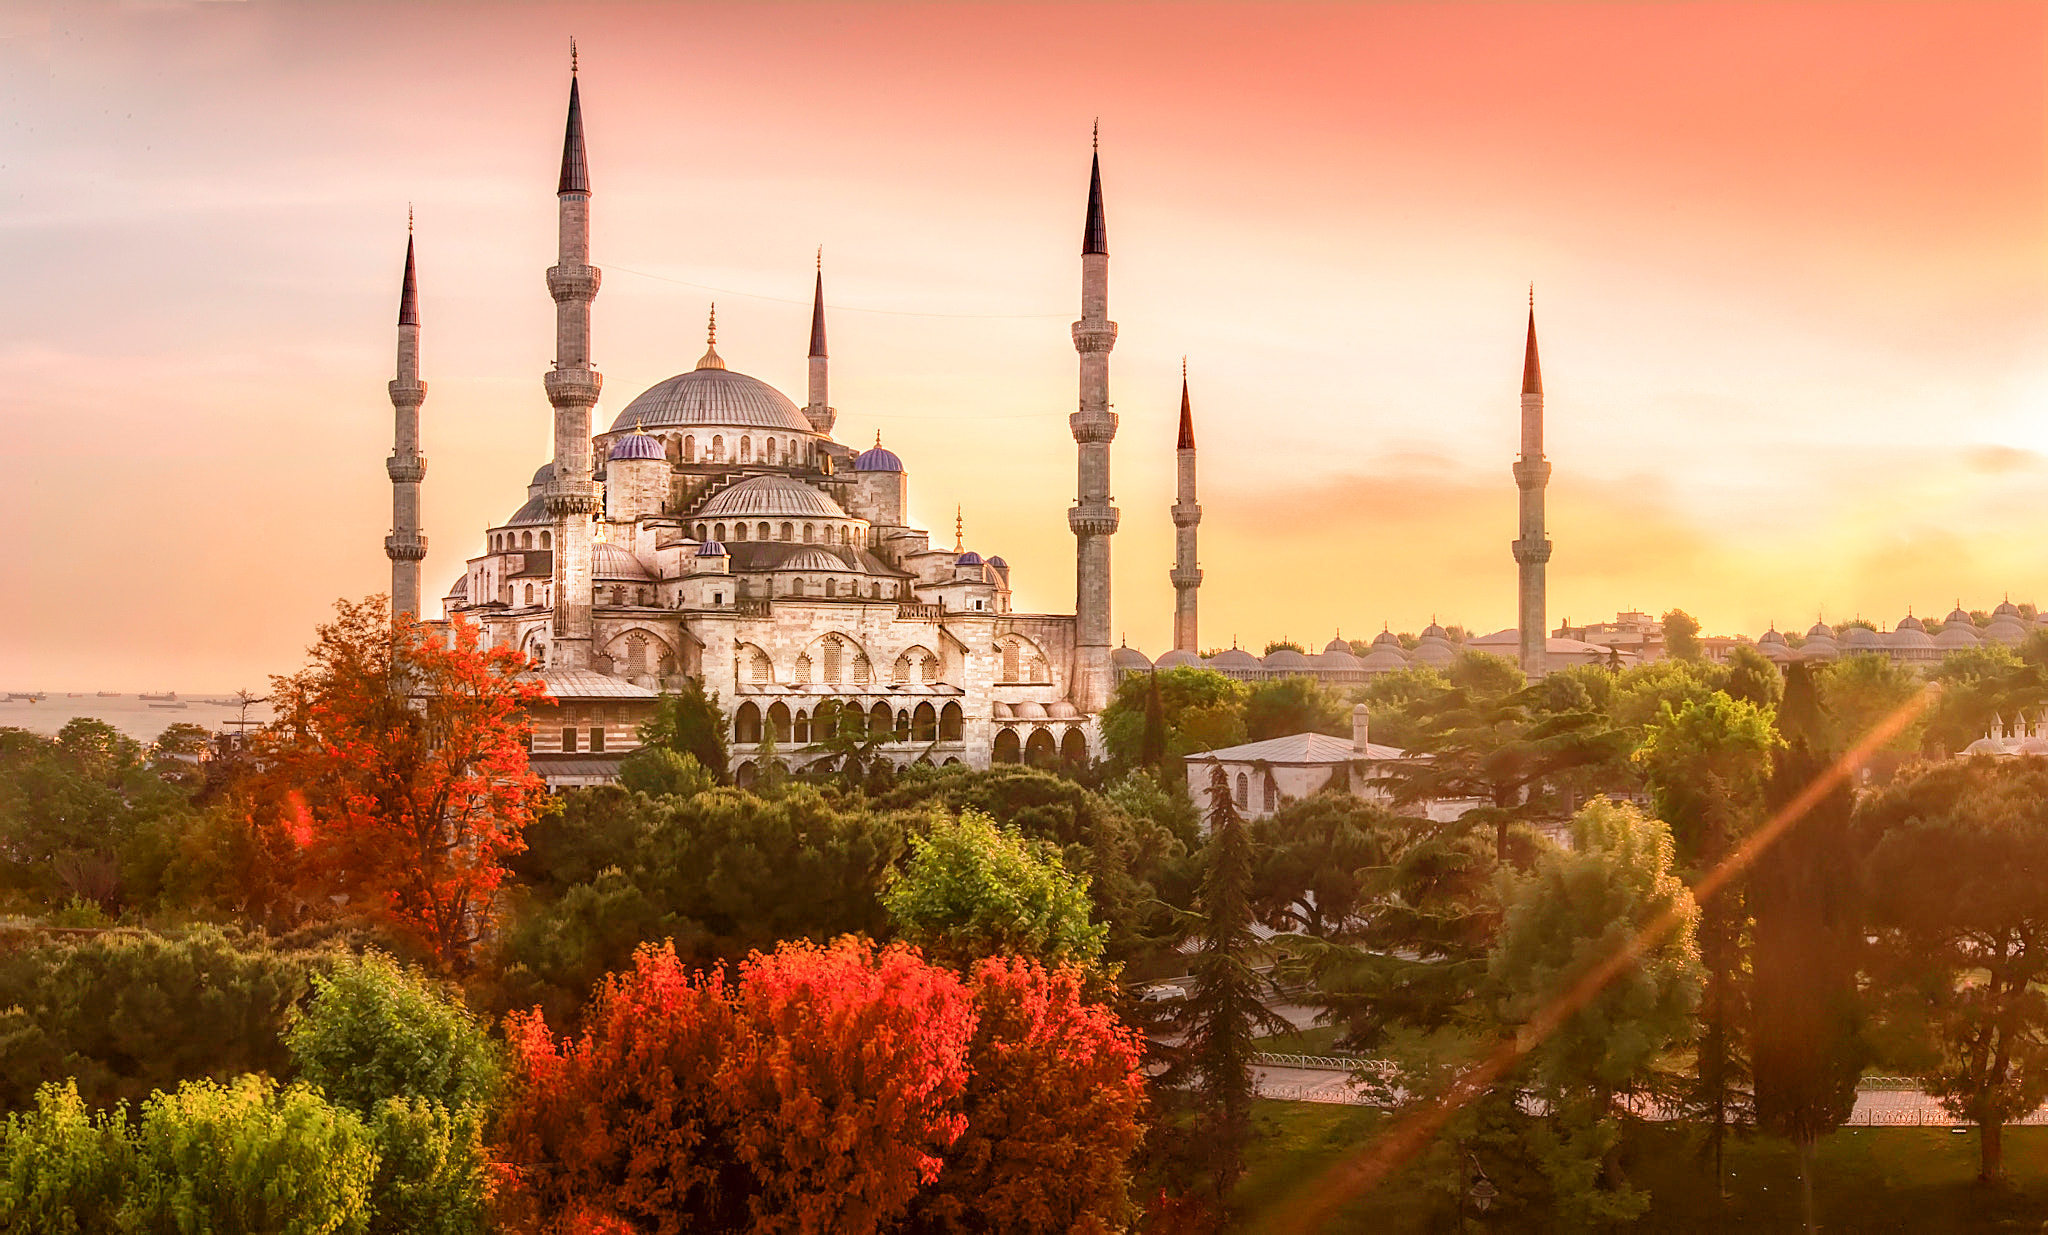 Free download istanbul turkey wallpapers in k all hd wallpapers x for your desktop mobile tablet explore istanbul wallpapers istanbul hd wallpaper